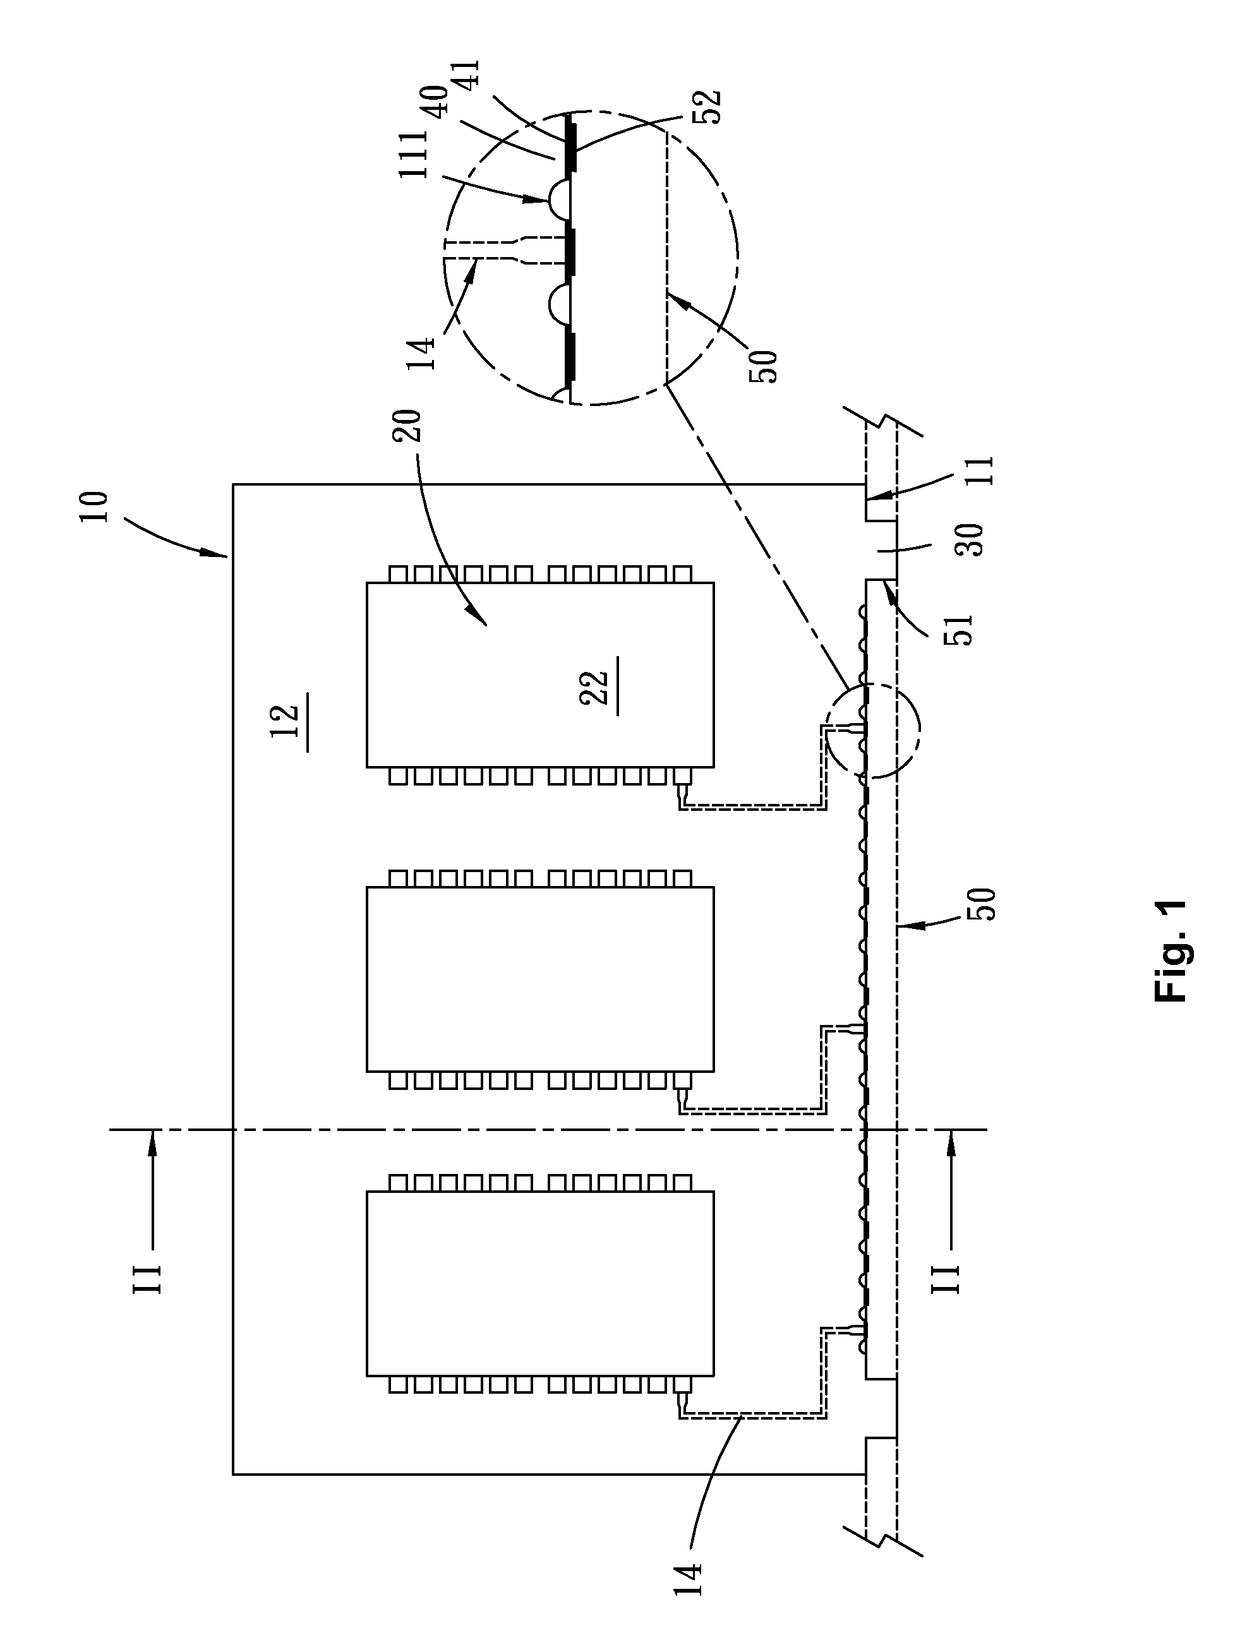 Circuit module having surface-mount pads on a lateral surface for connecting with a circuit board